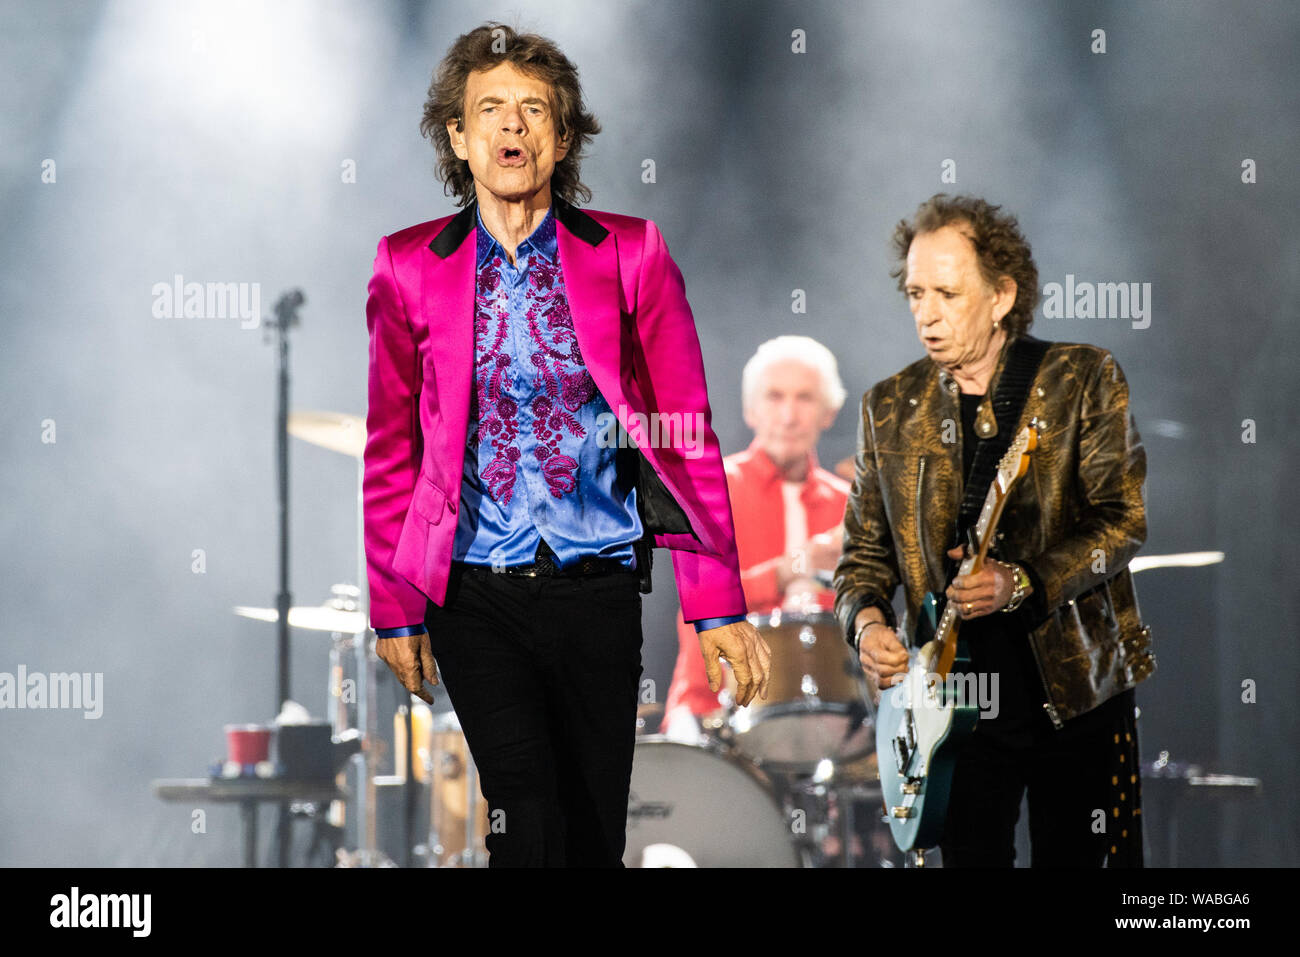 SANTA CLARA, CALIFORNIA - AUGUST 18: Mick Jagger, Charlie Watts and Keith  Richards of The Rolling Stones perform at Levi's Stadium on August 18, 2019  in Santa Clara, California. Photo: Chris Tuite/imageSPACE/MediaPunch